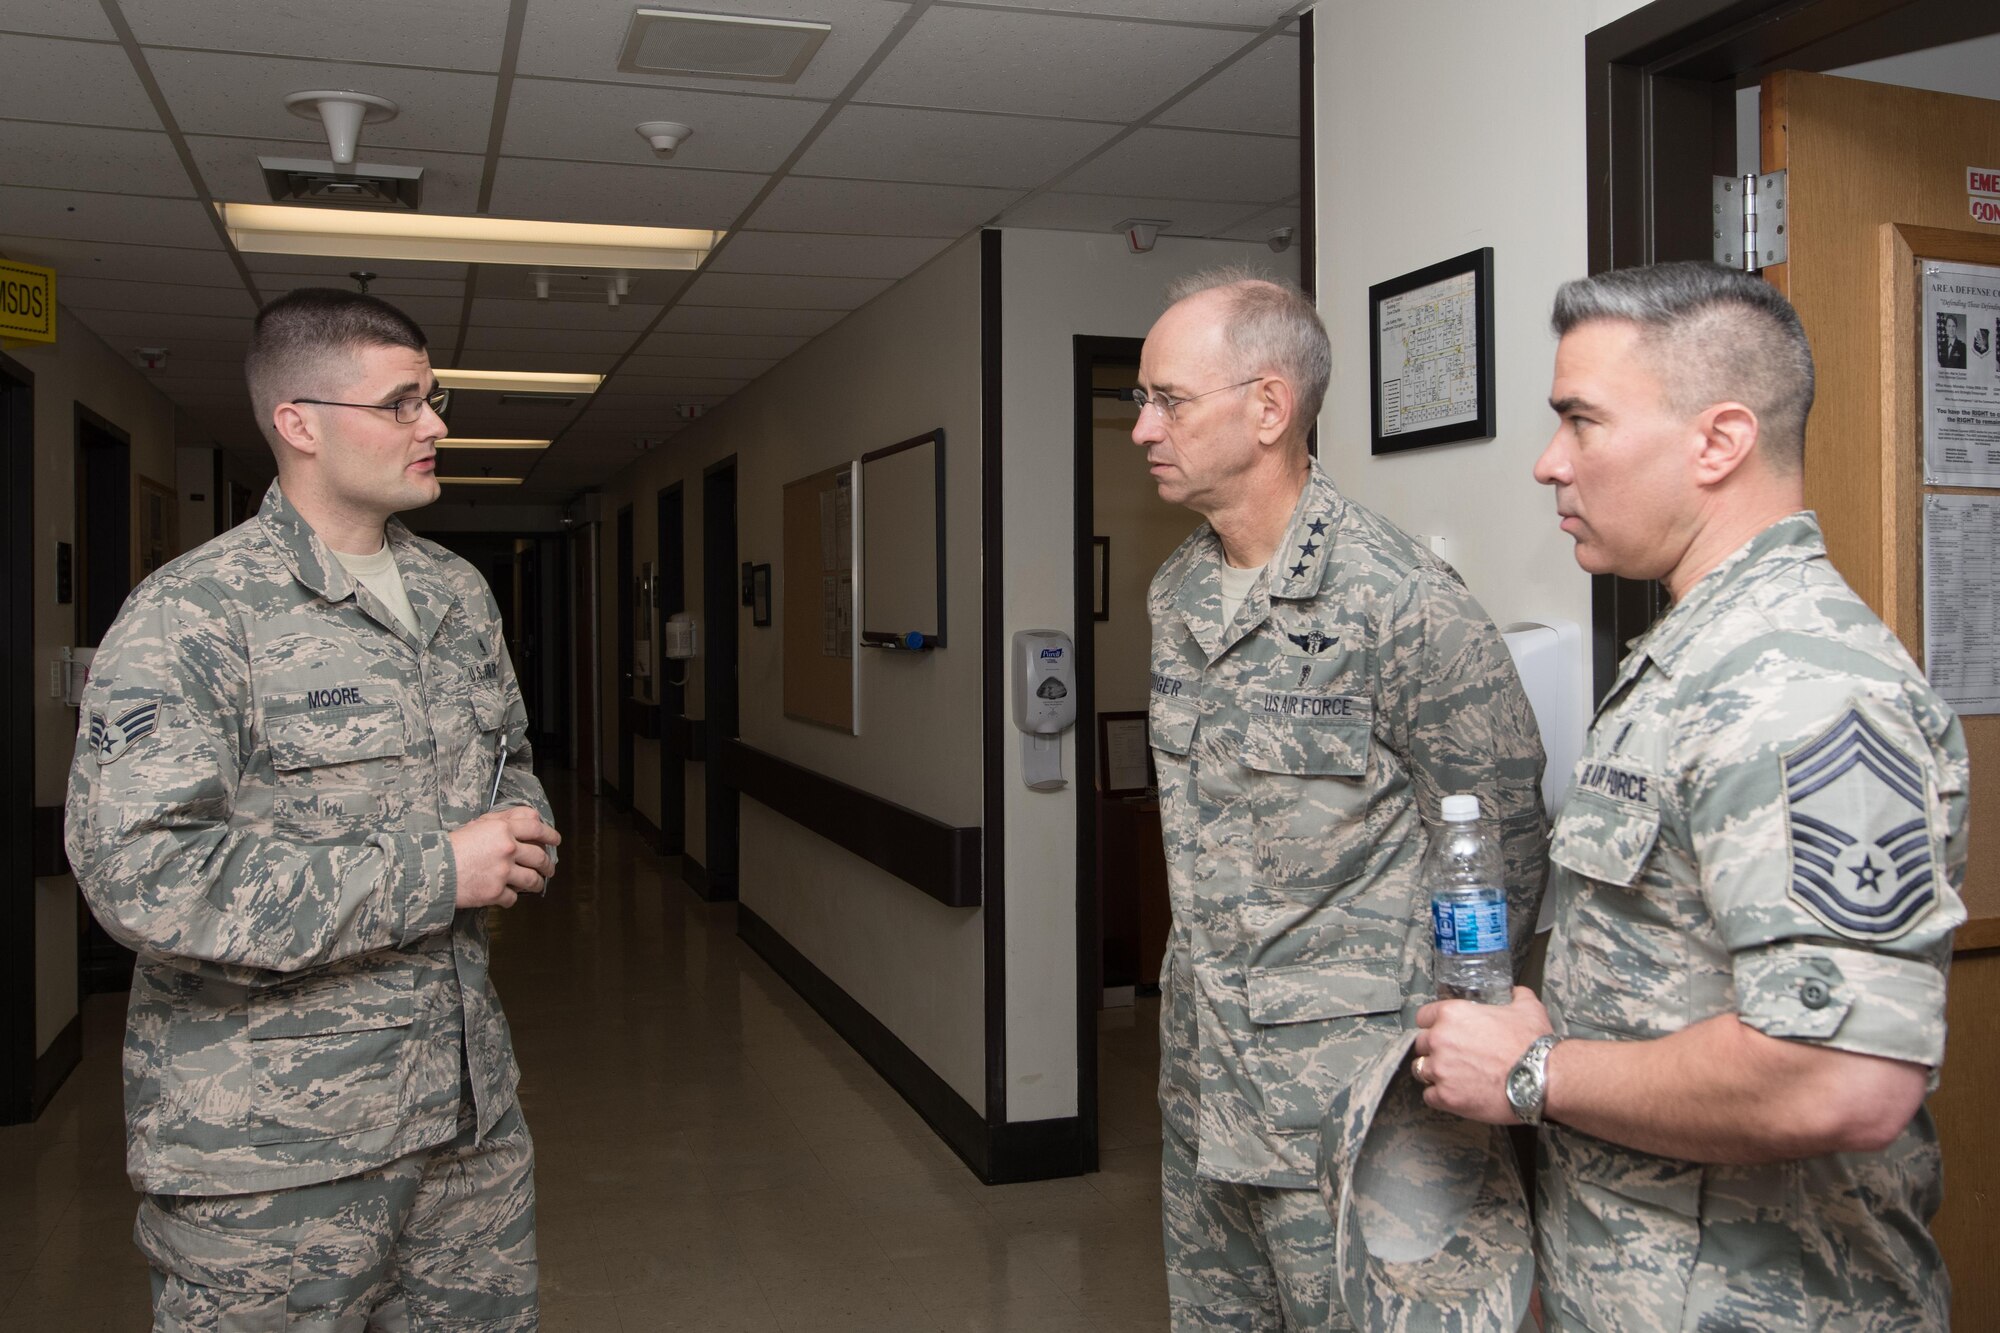 U.S. Air Force Senior Airman Patrick Moore, 51st Medical Operation Squadron emergency medical technician, speaks with Lt. Gen. (Dr.) Mark A. Ediger, Surgeon General of the Air Force, Headquarters U.S. Air Force, Washington, D.C., and Chief Master Sgt. Jason Pace, Office of the Surgeon General medical enlisted force chief, during a tour of the 51st Medical Group Sept. 14, 2016, at Osan Air Base, Republic of Korea. Ediger and Pace toured various medical facilities within the group to observe the progress and challenges of AF military treatment facilities. (U.S. Air Force photo by Senior Airman Dillian Bamman)